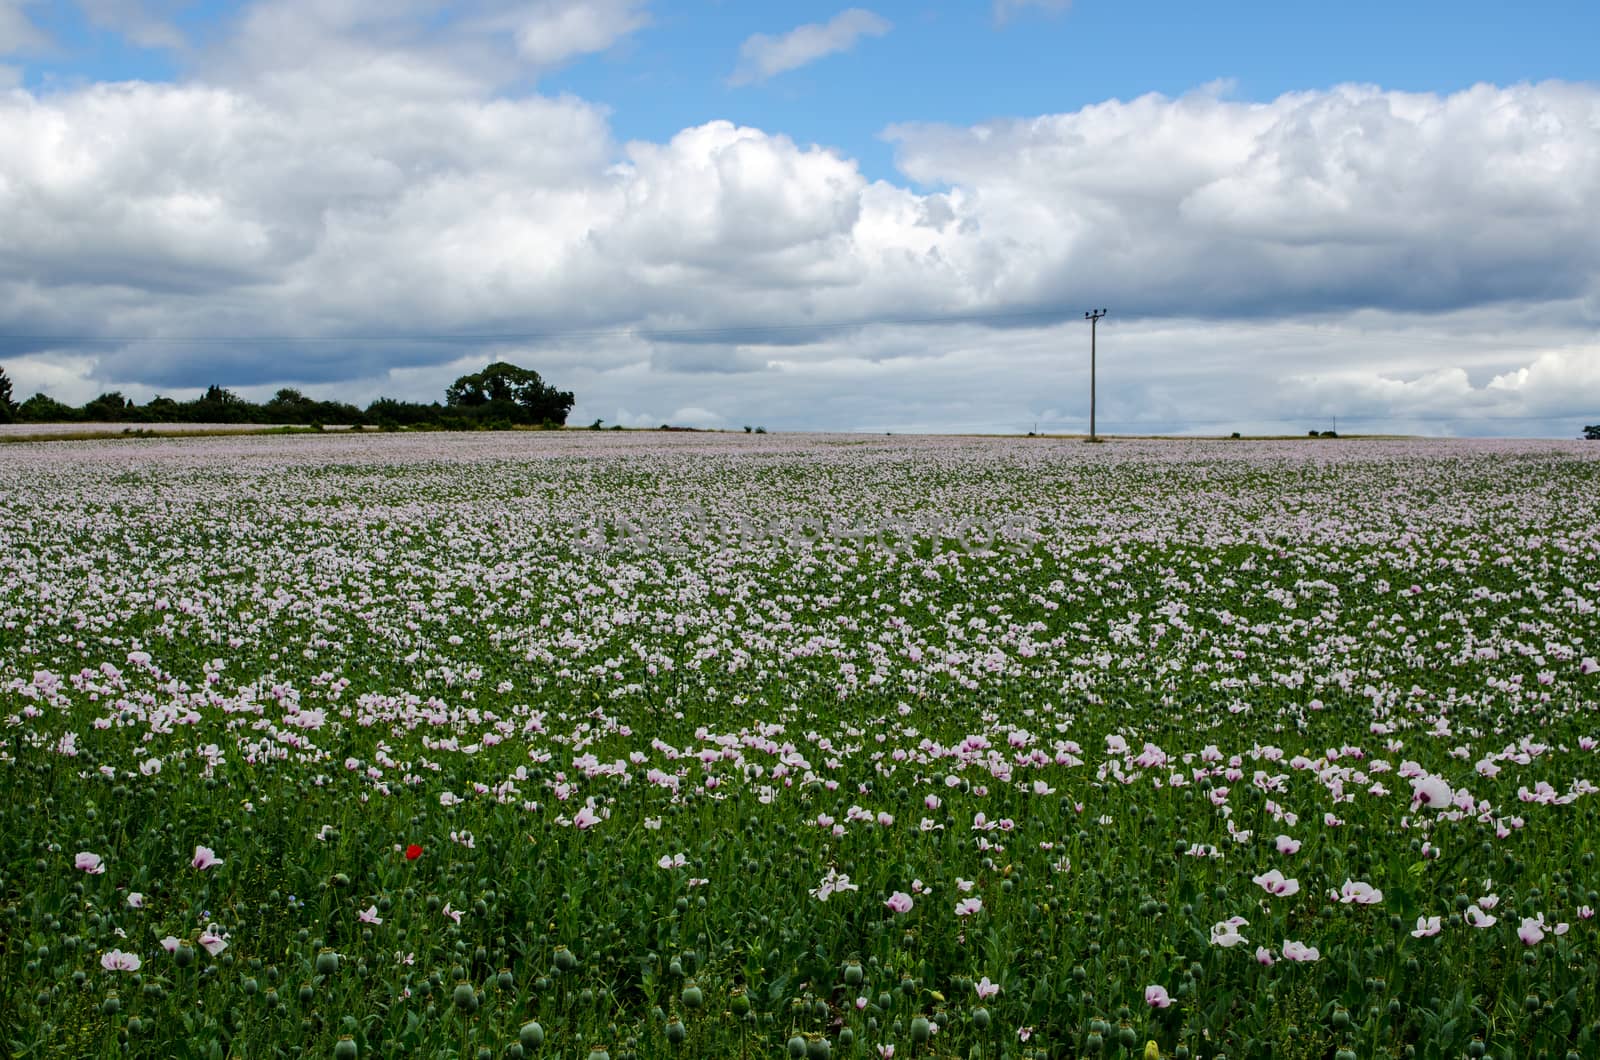 A field full of opium poppies, latin name Papaver somniferum, growing as a crop in Hampshire, UK.  The seed heads will be used to produce medicinal morphine for the pharmaceutical industry.  